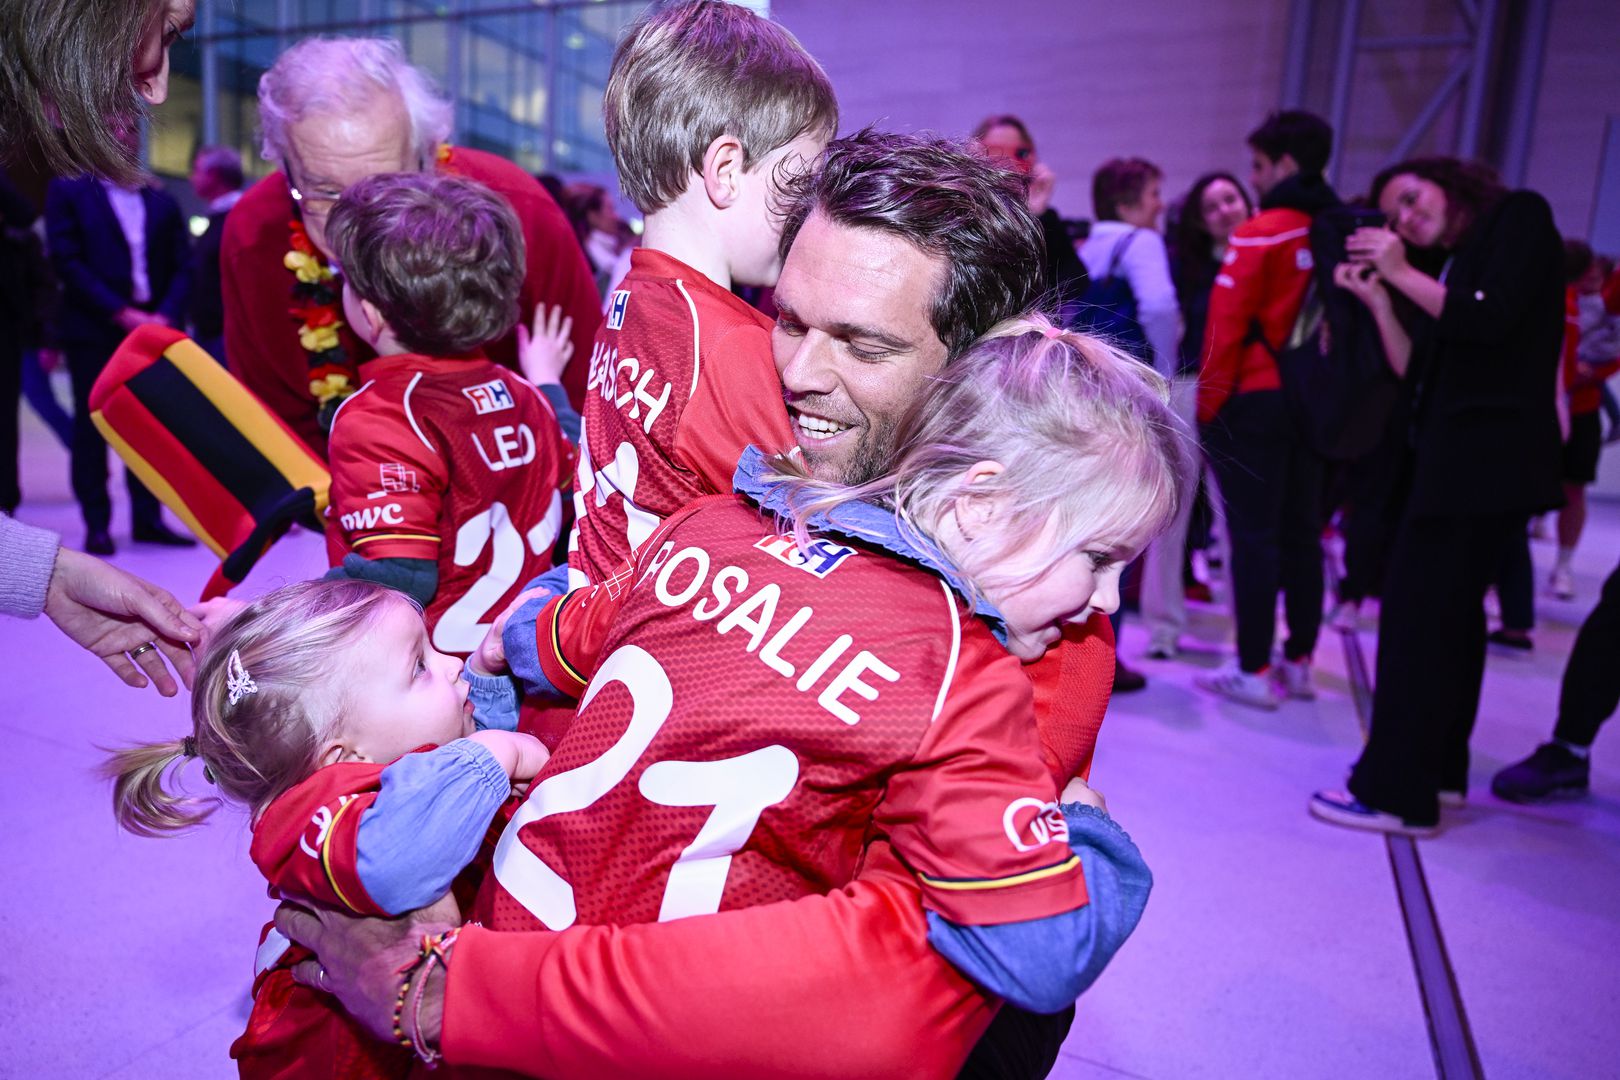 Belgium's goalkeeper Vincent Vanasch pictured during the return of Belgian national hockey team Red Lions at Brussels airport in Zavemtem on Tuesday 31 January 2023, after playing the World Cup tournament. The lions took the silver medal at the 2023 Men's FIH Hockey World Cup in India, losing the final to Germany. BELGA PHOTO LAURIE DIEFFEMBACQ